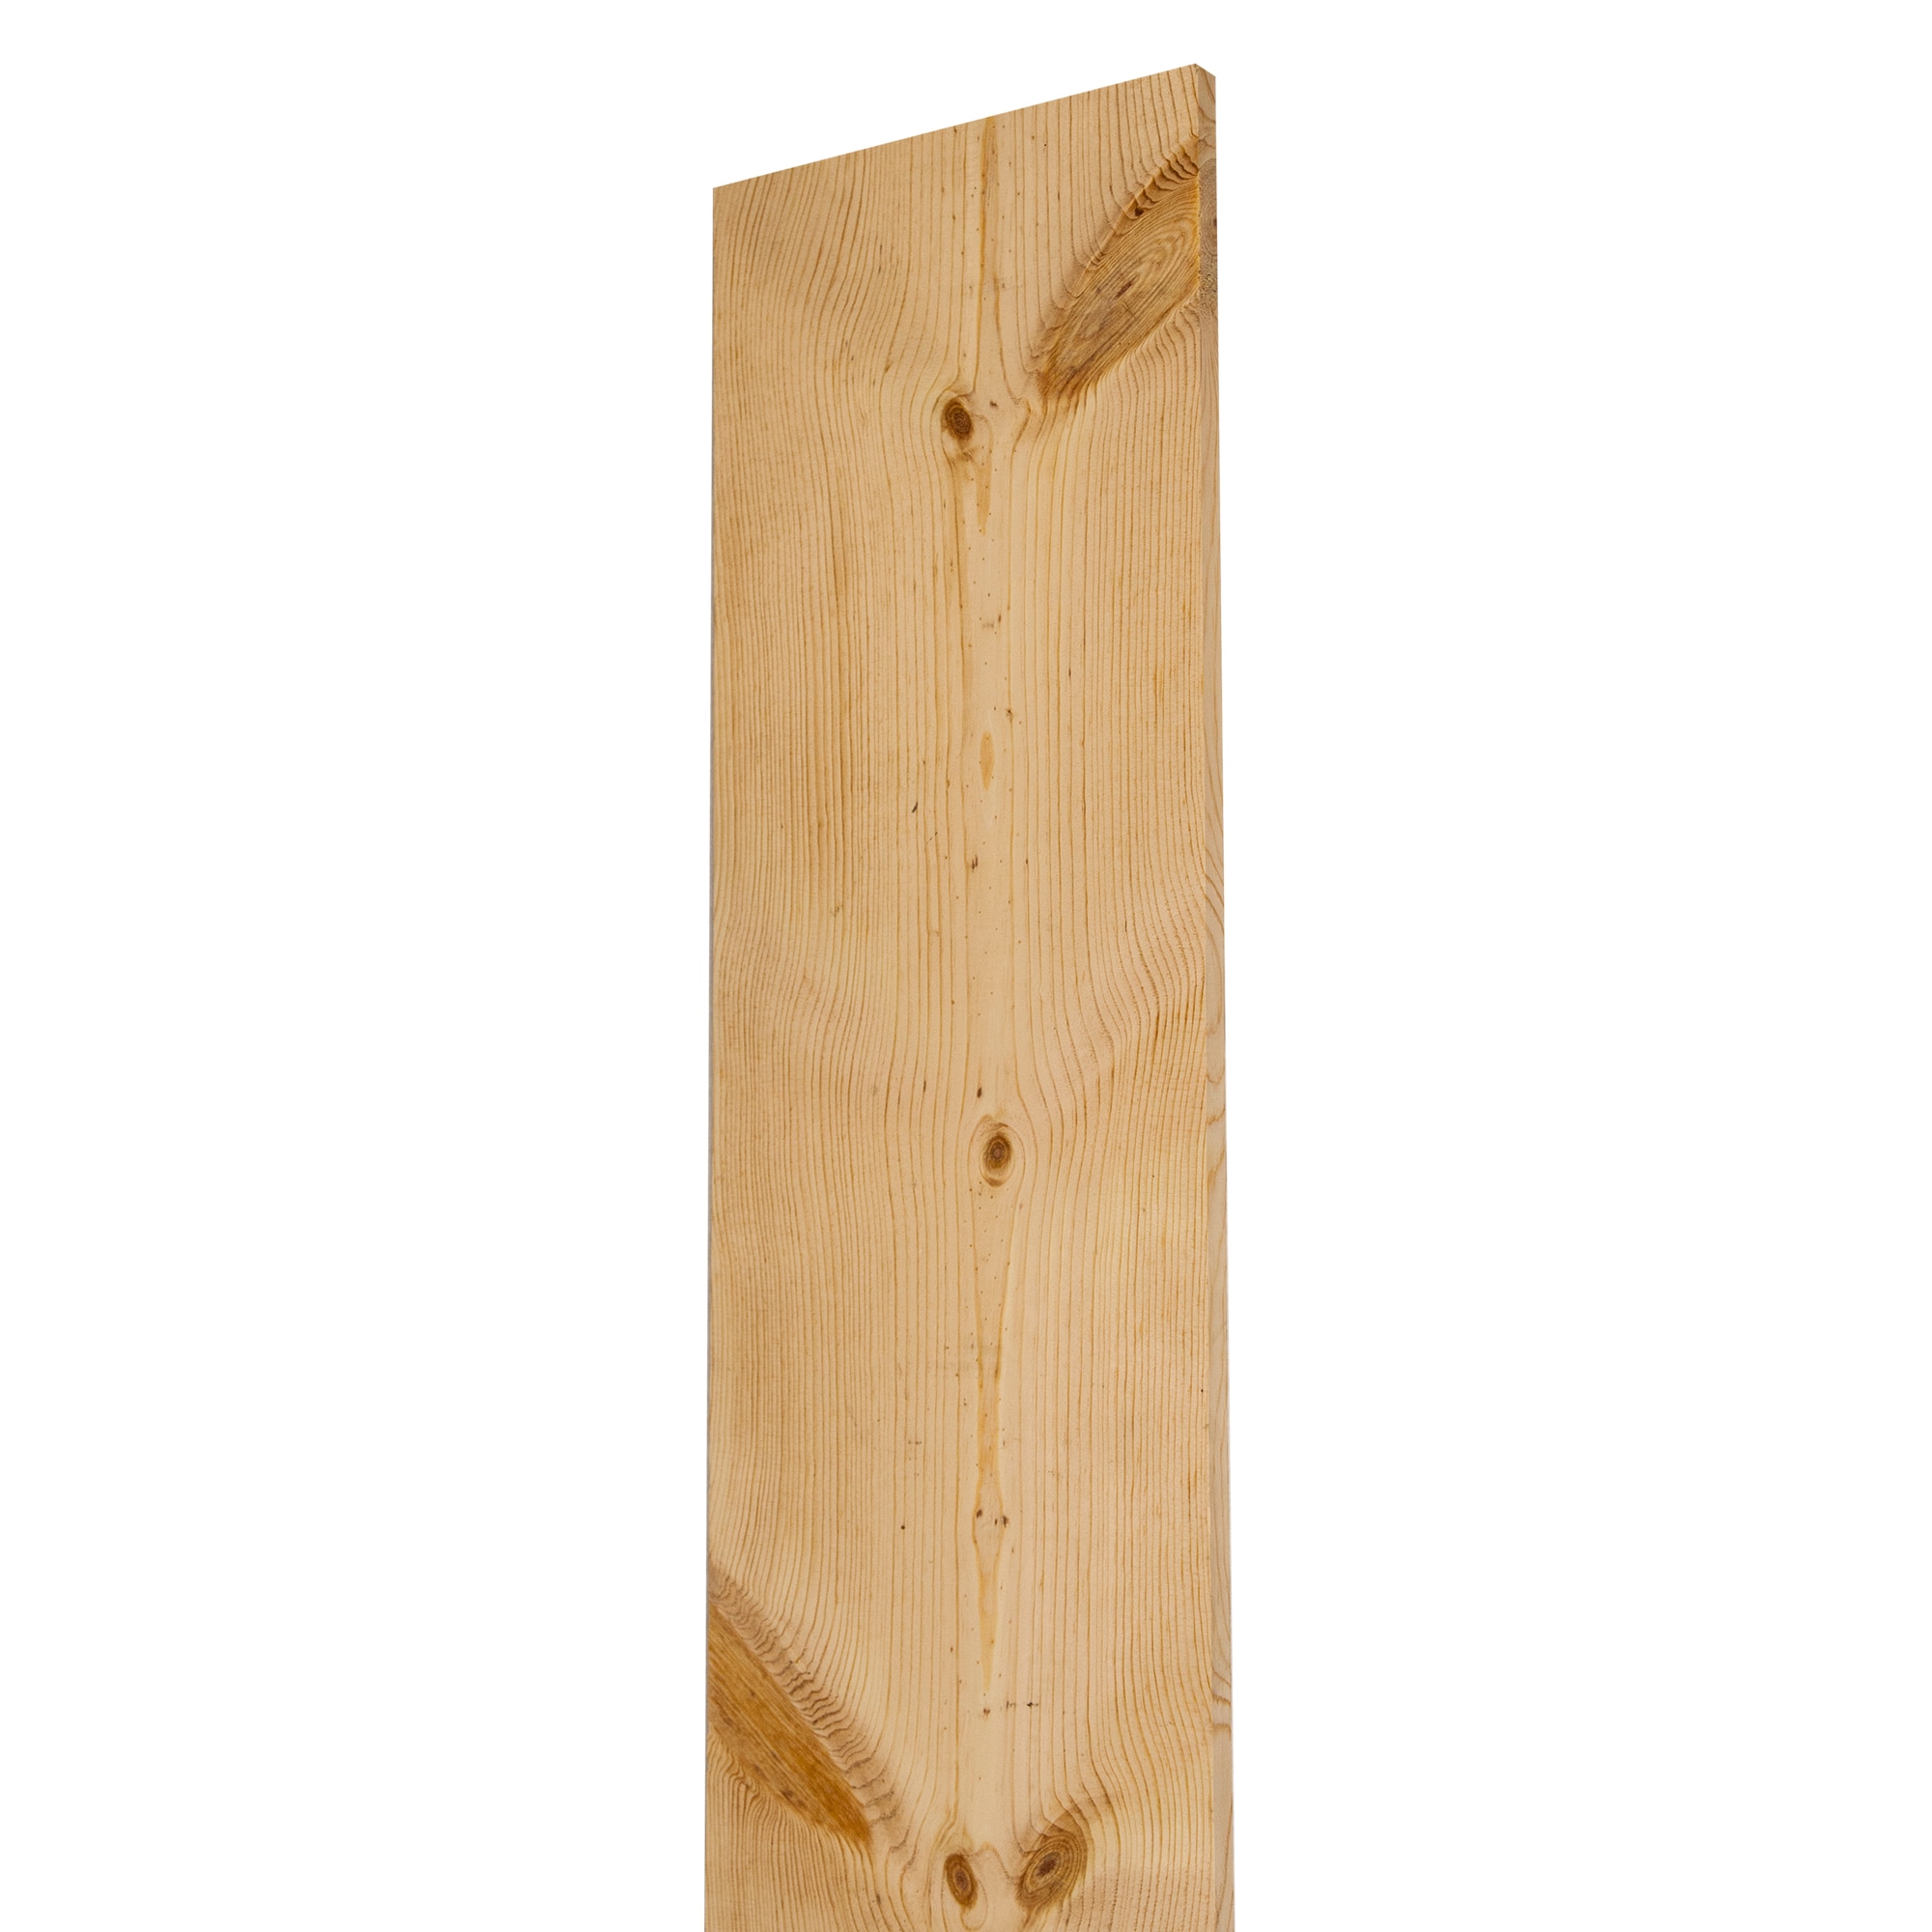 RELIABILT 1-in x 12-in x 8-ft Unfinished Whitewood Board at